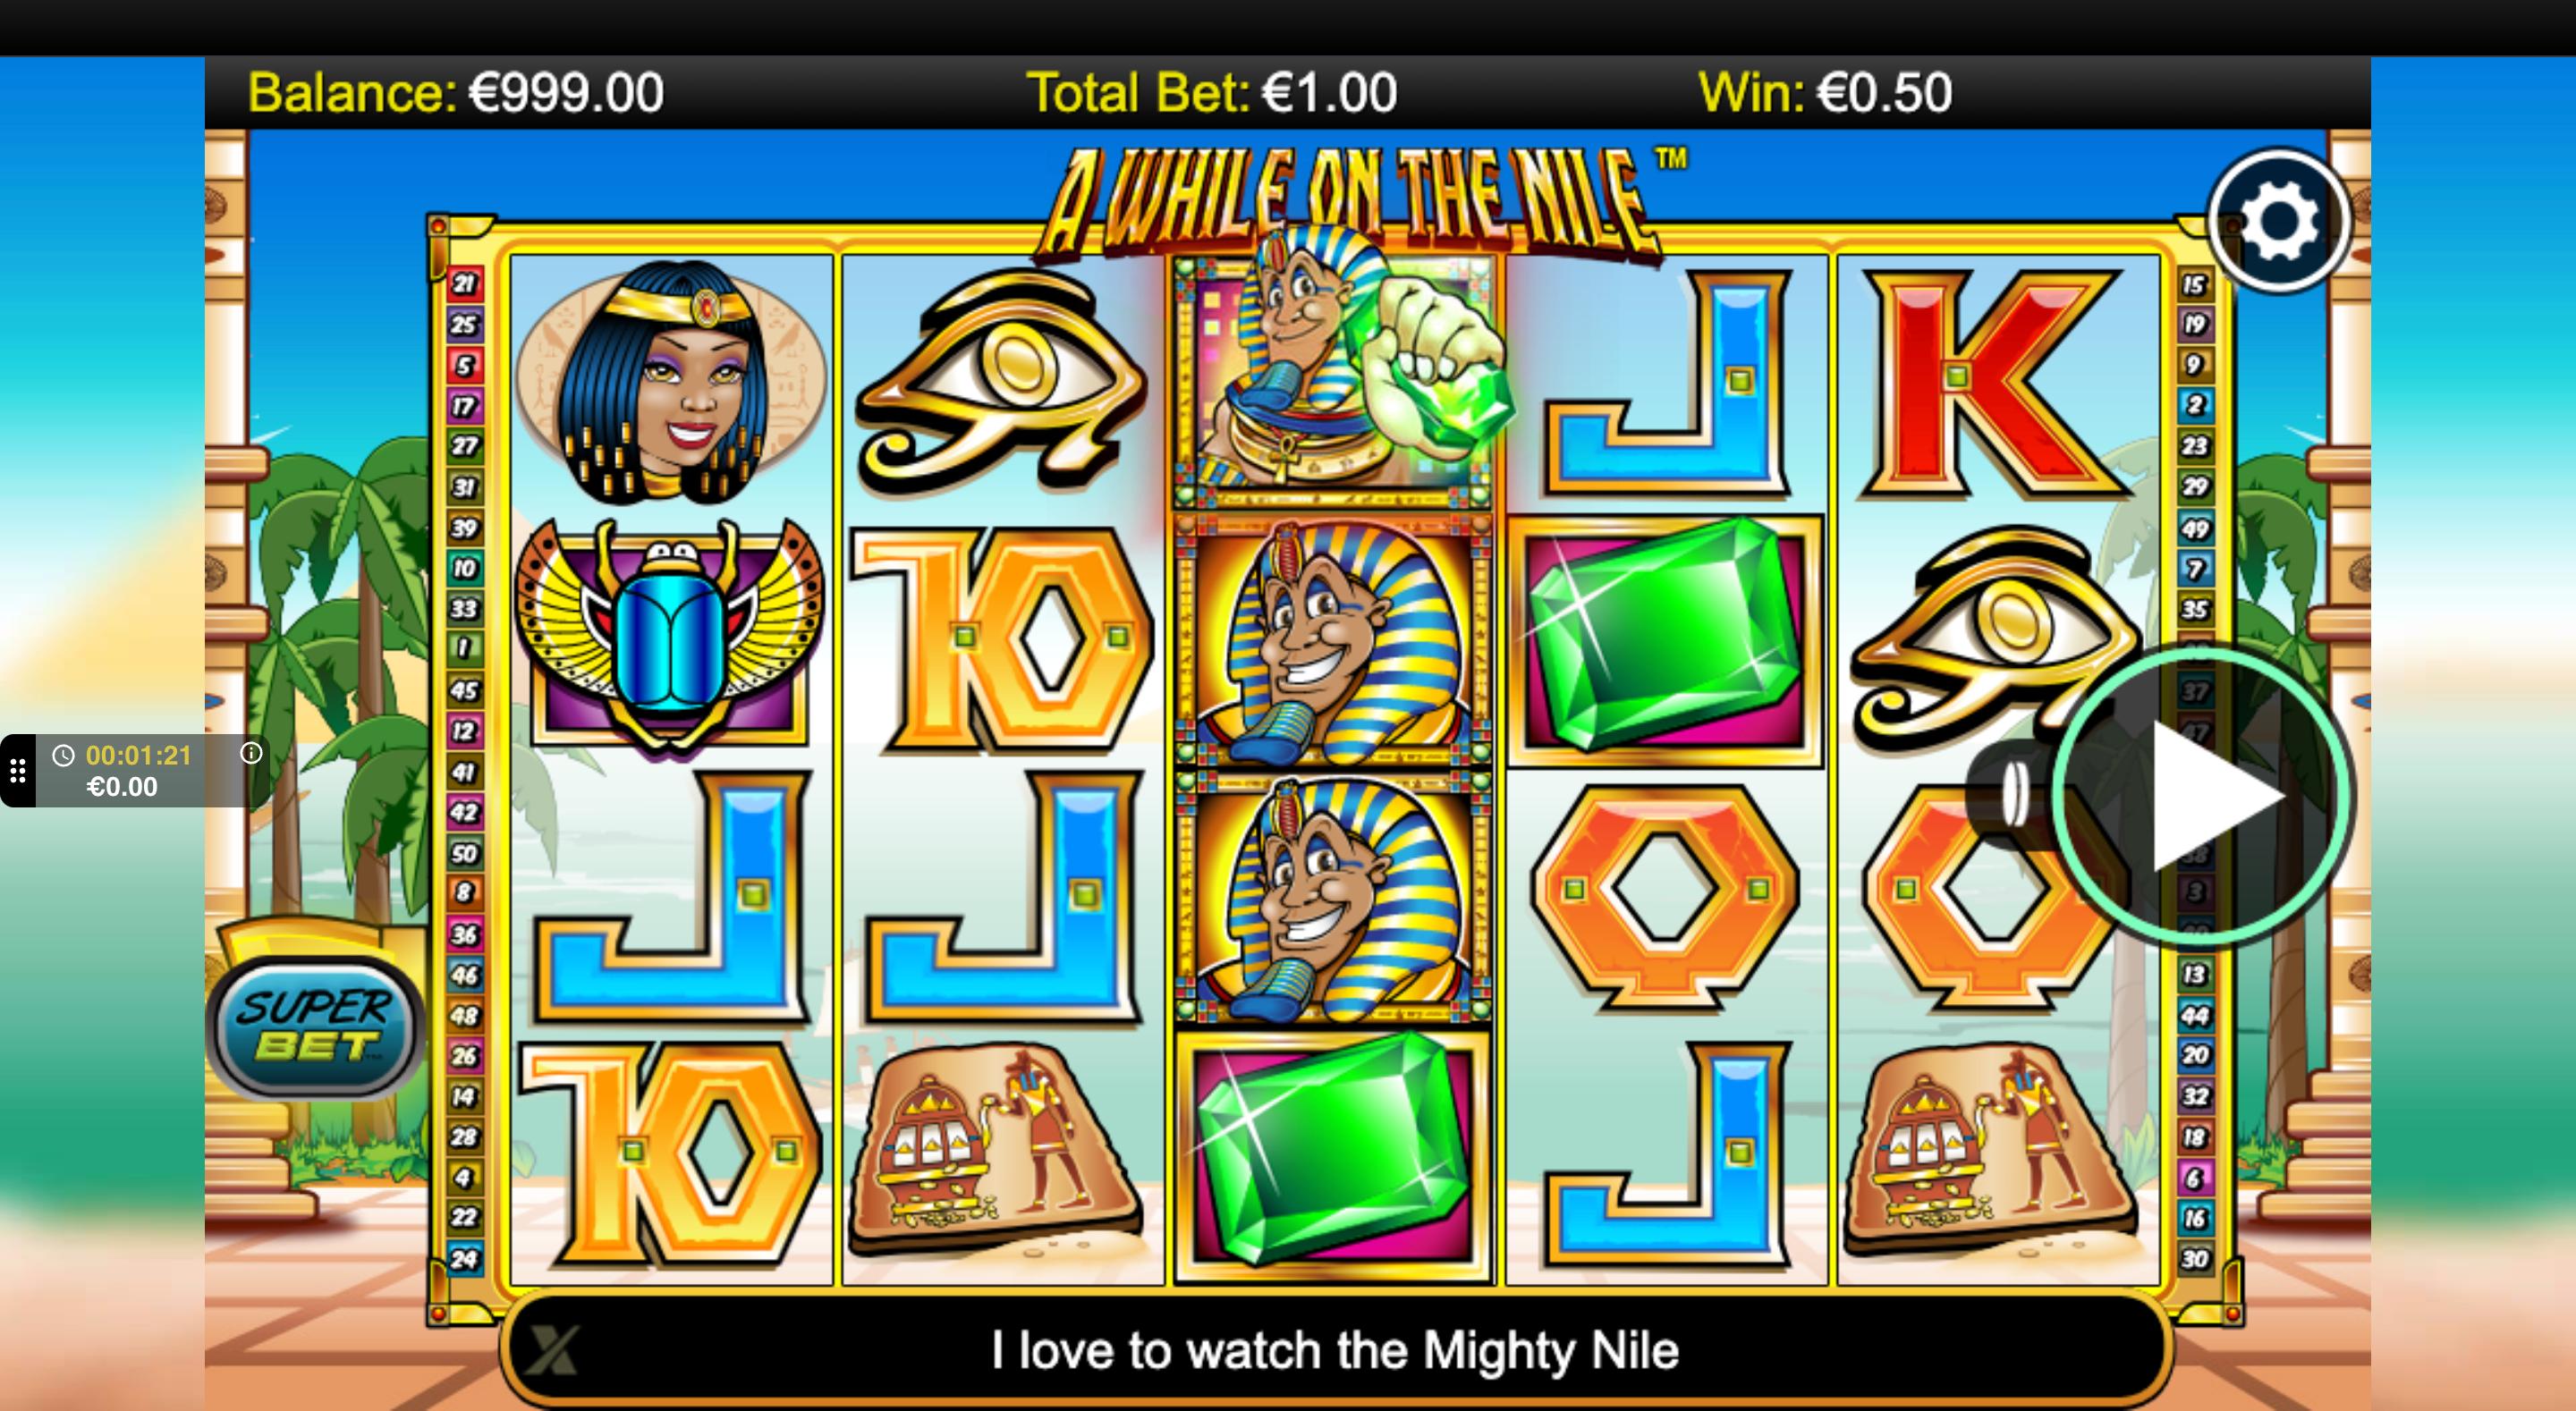 A While on the Nile Gameplay